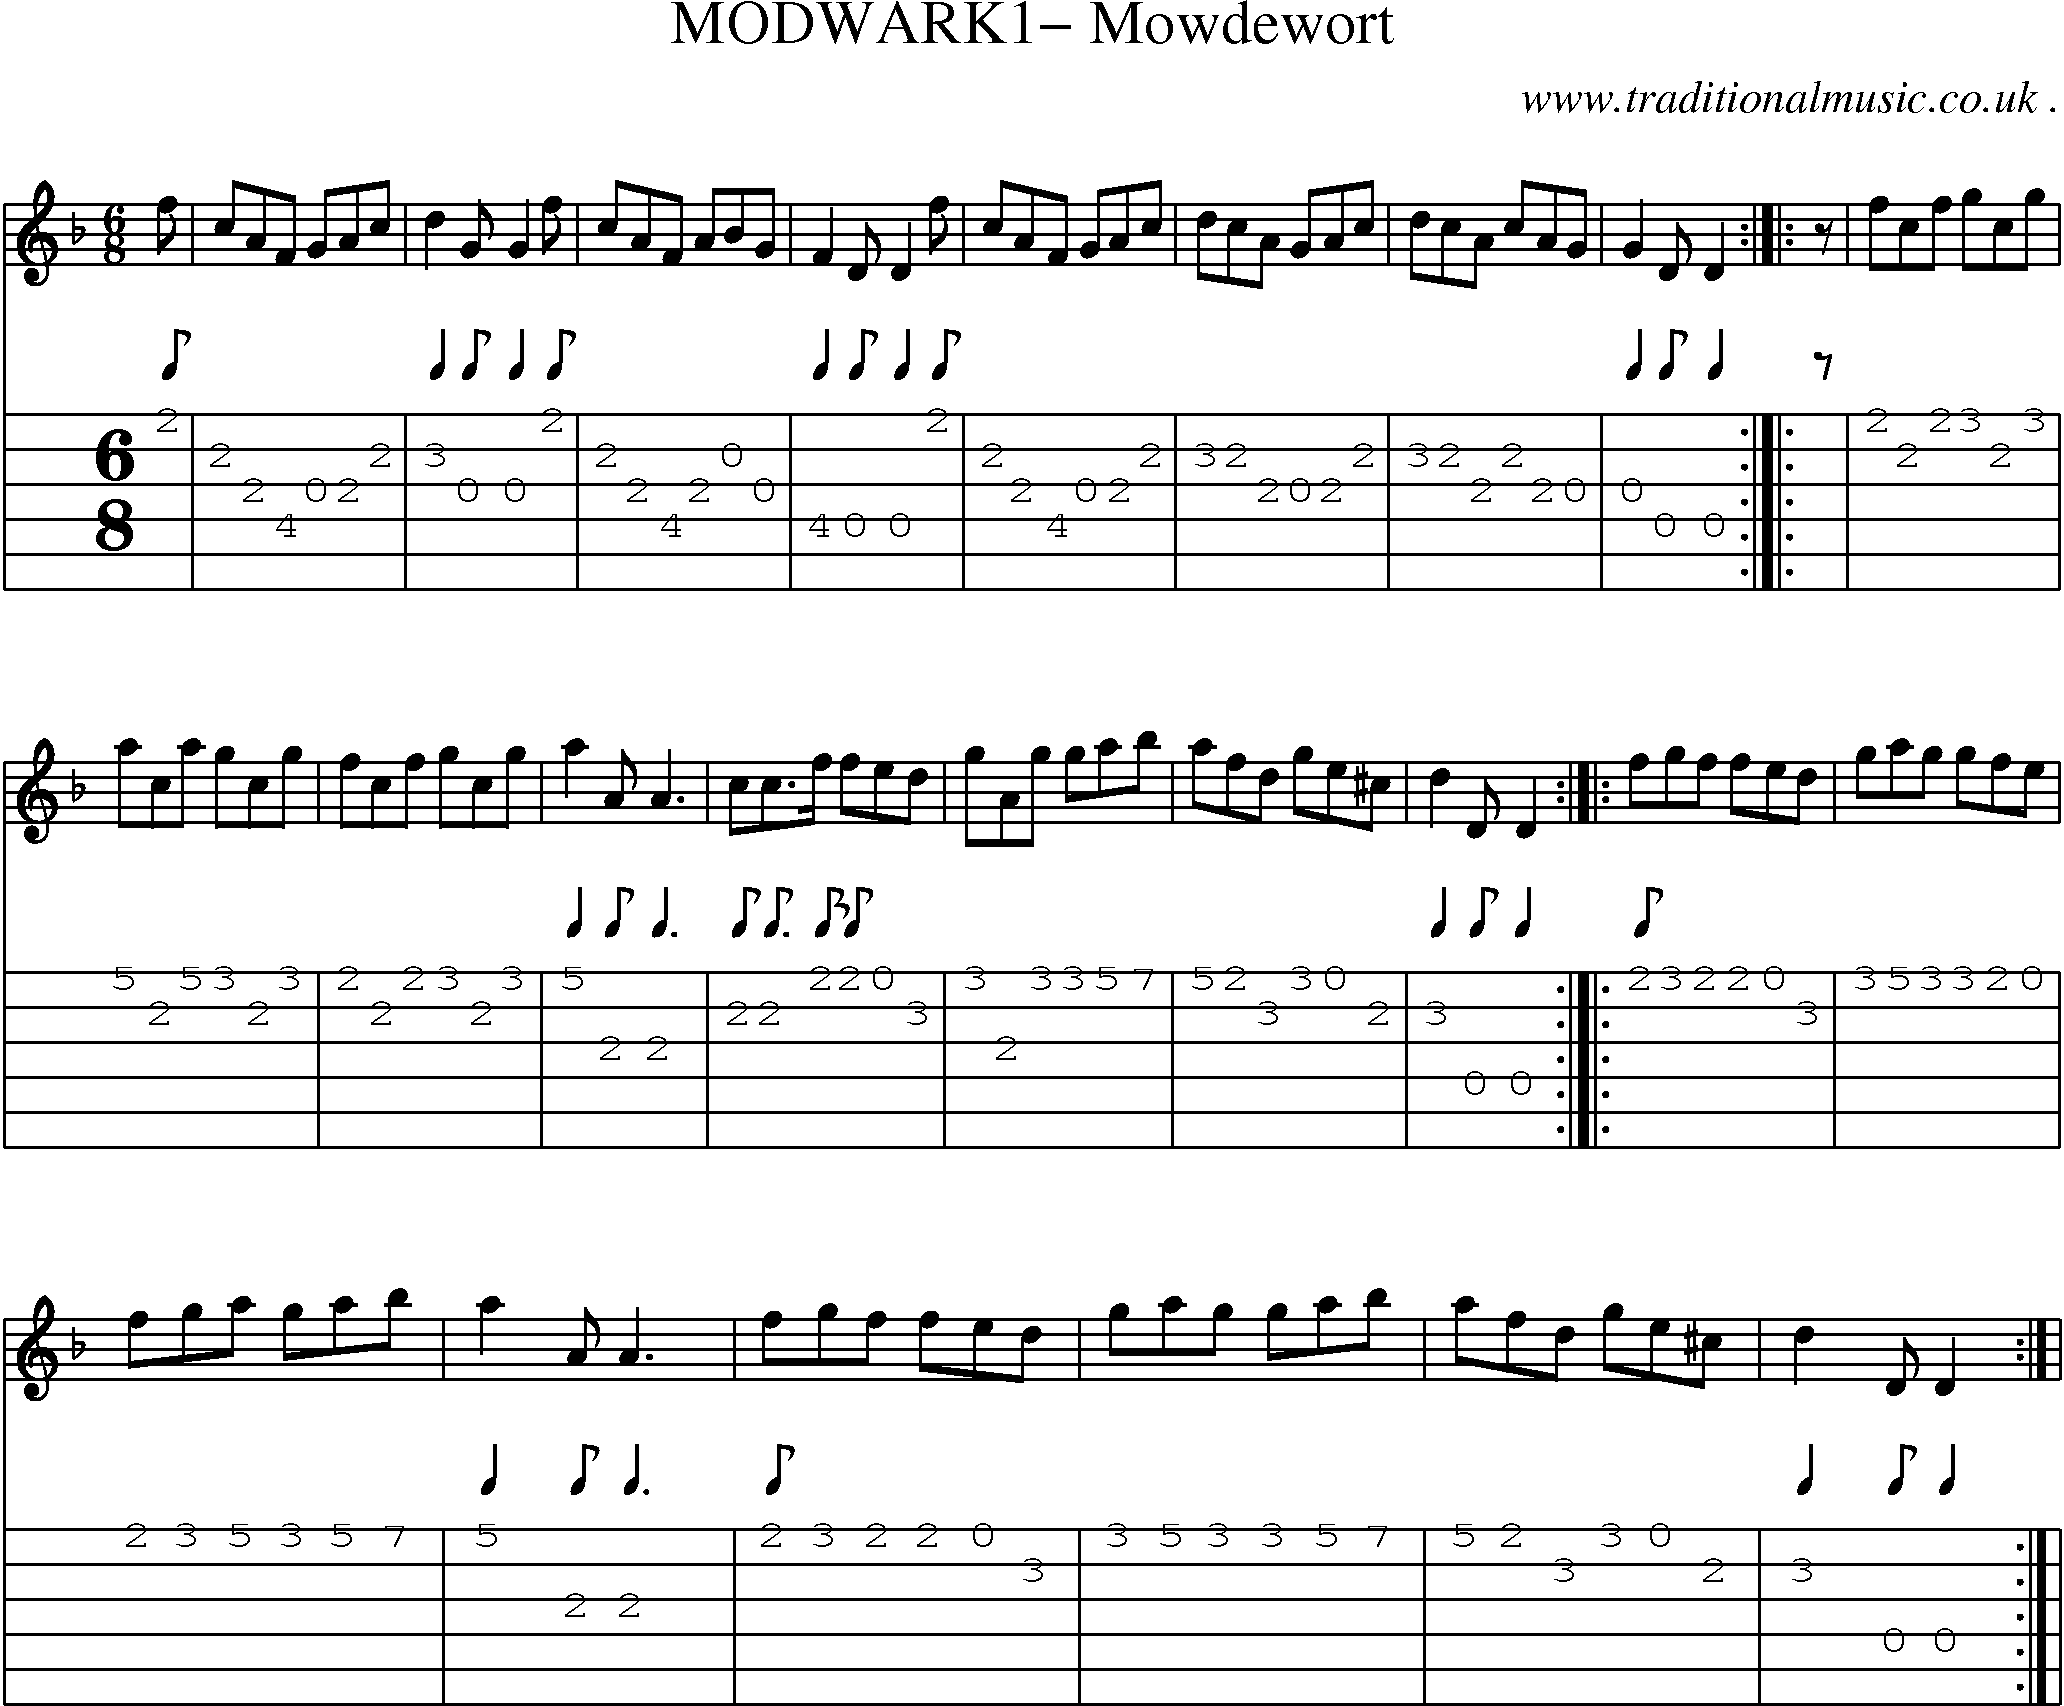 Sheet-Music and Guitar Tabs for Modwark1 Mowdewort